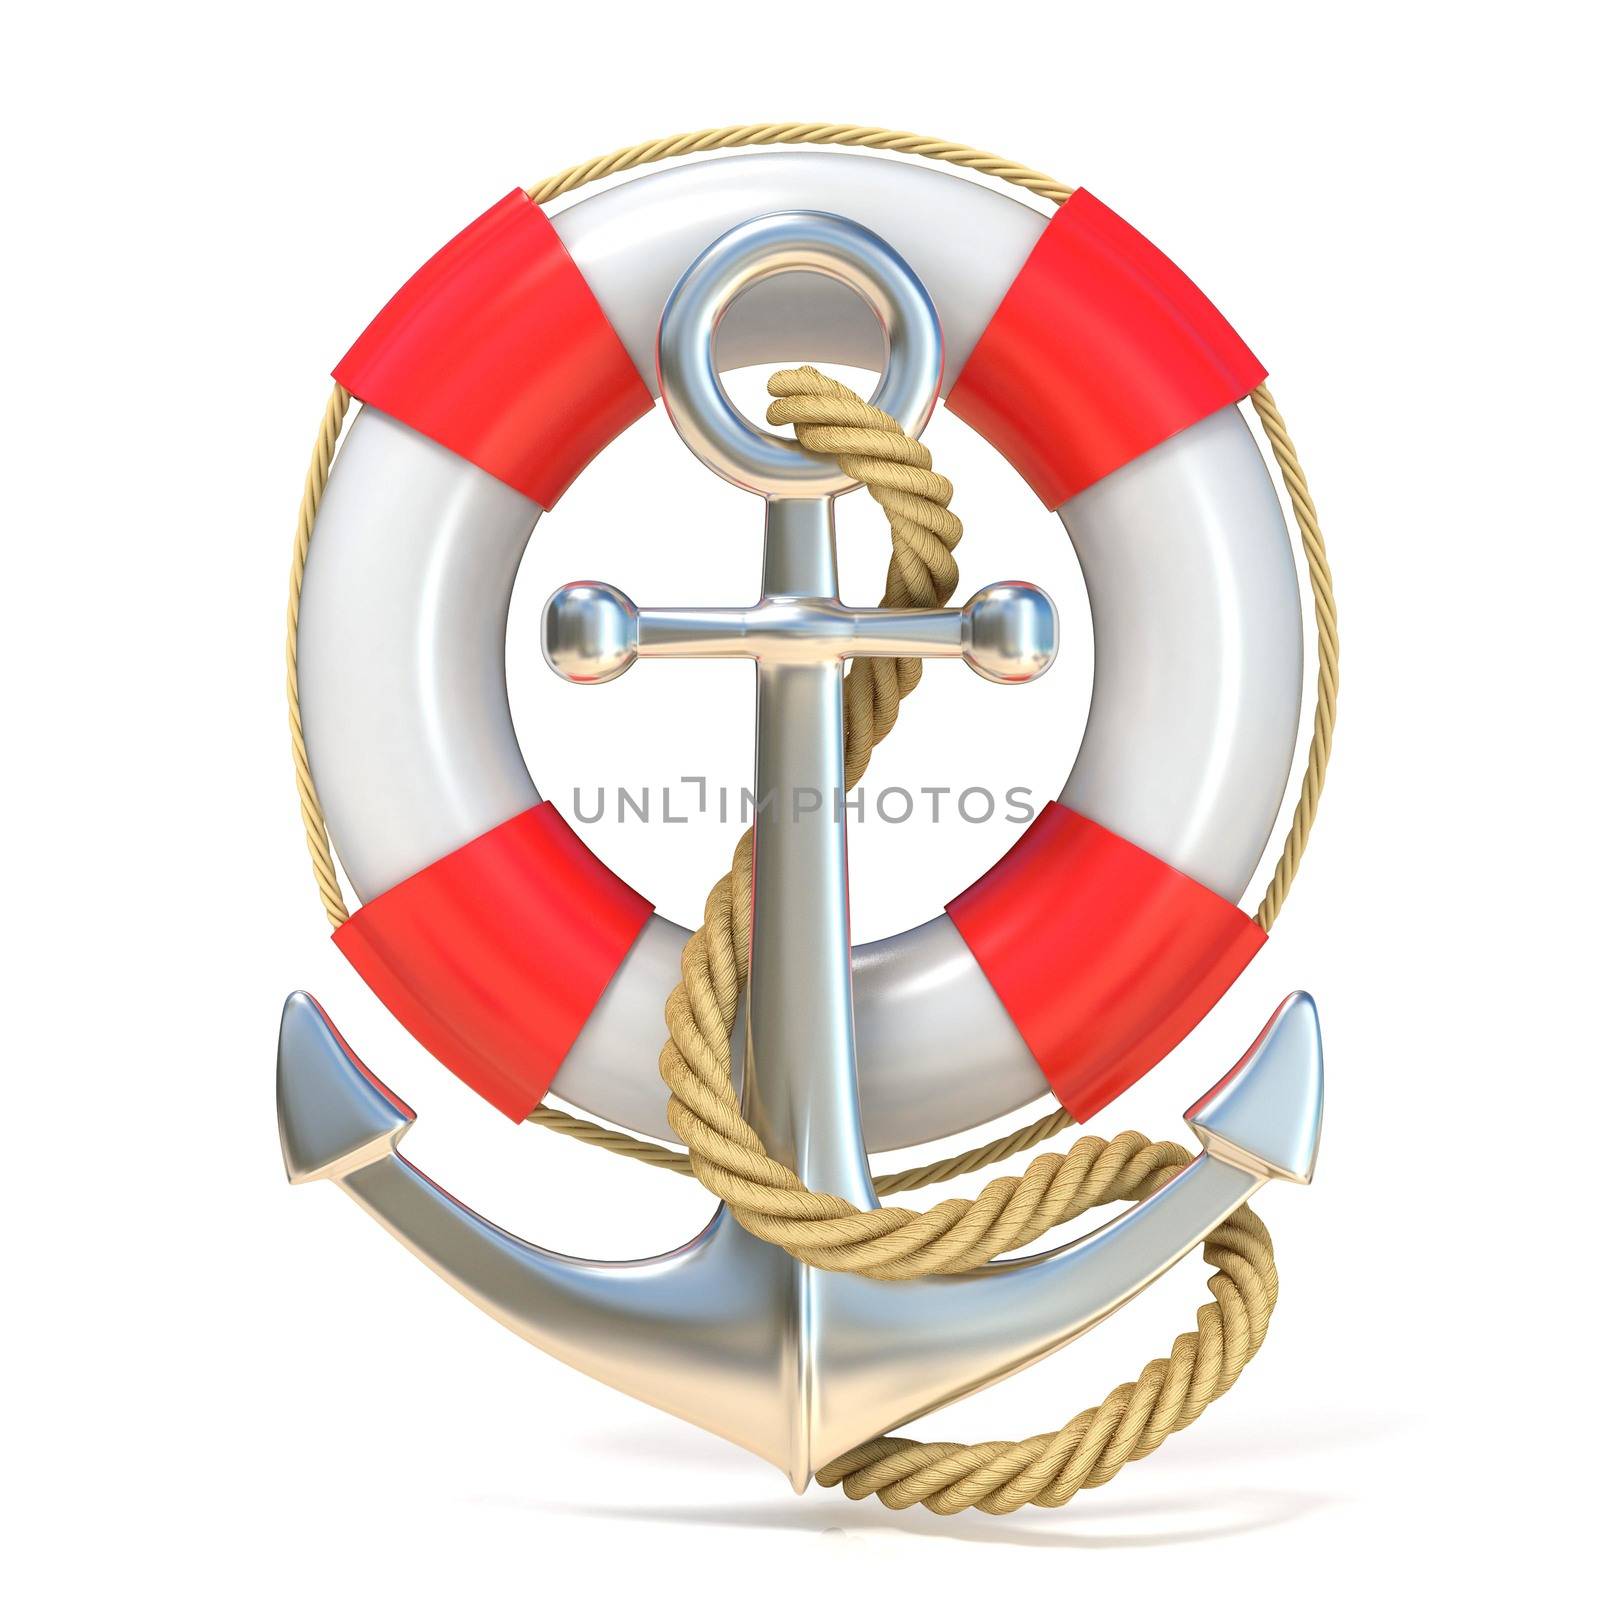 Anchor, lifebuoy and rope. 3D render illustration isolated on white background